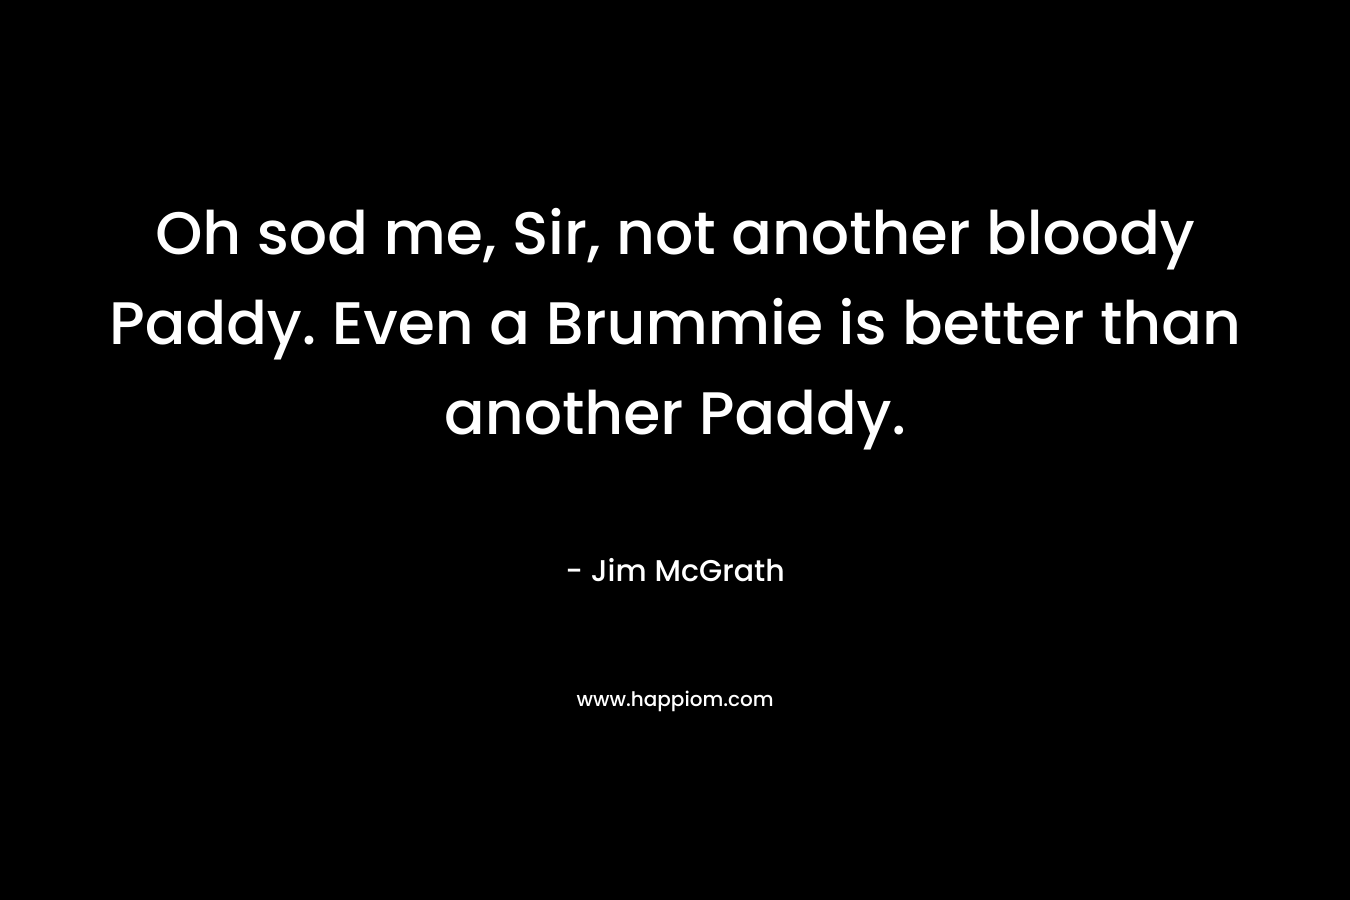 Oh sod me, Sir, not another bloody Paddy. Even a Brummie is better than another Paddy.